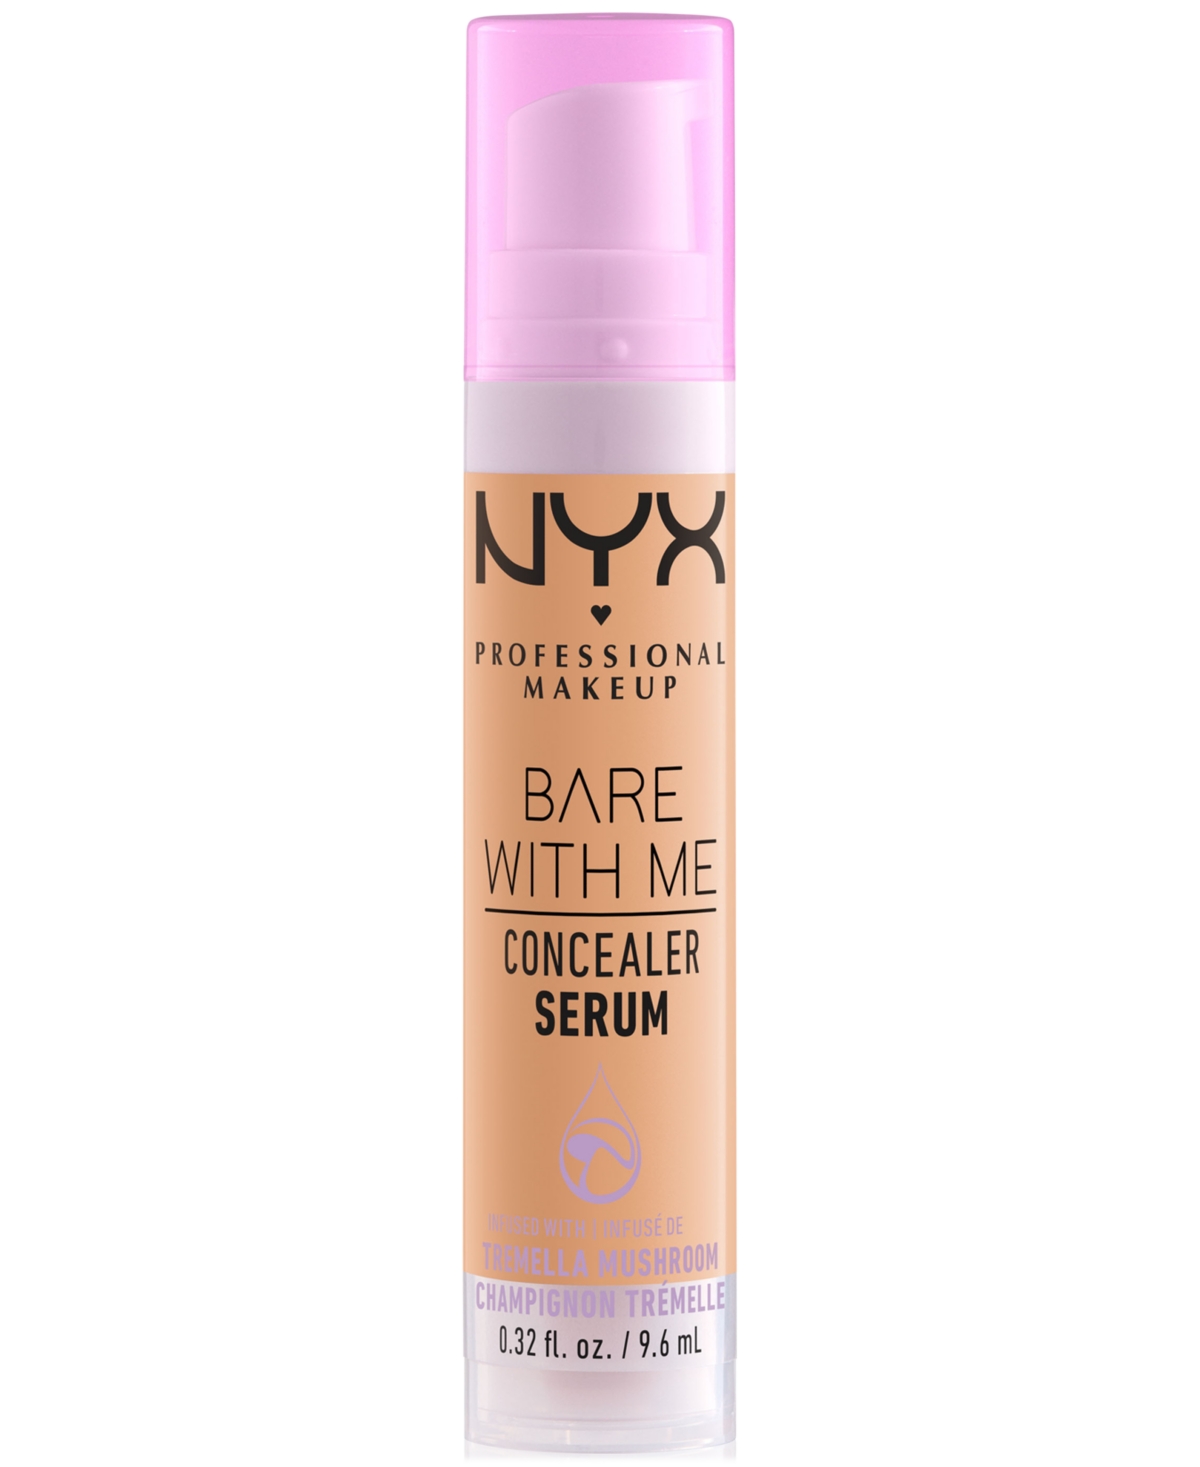 Nyx Professional Makeup Bare With Me Concealer Serum In Medium Golden